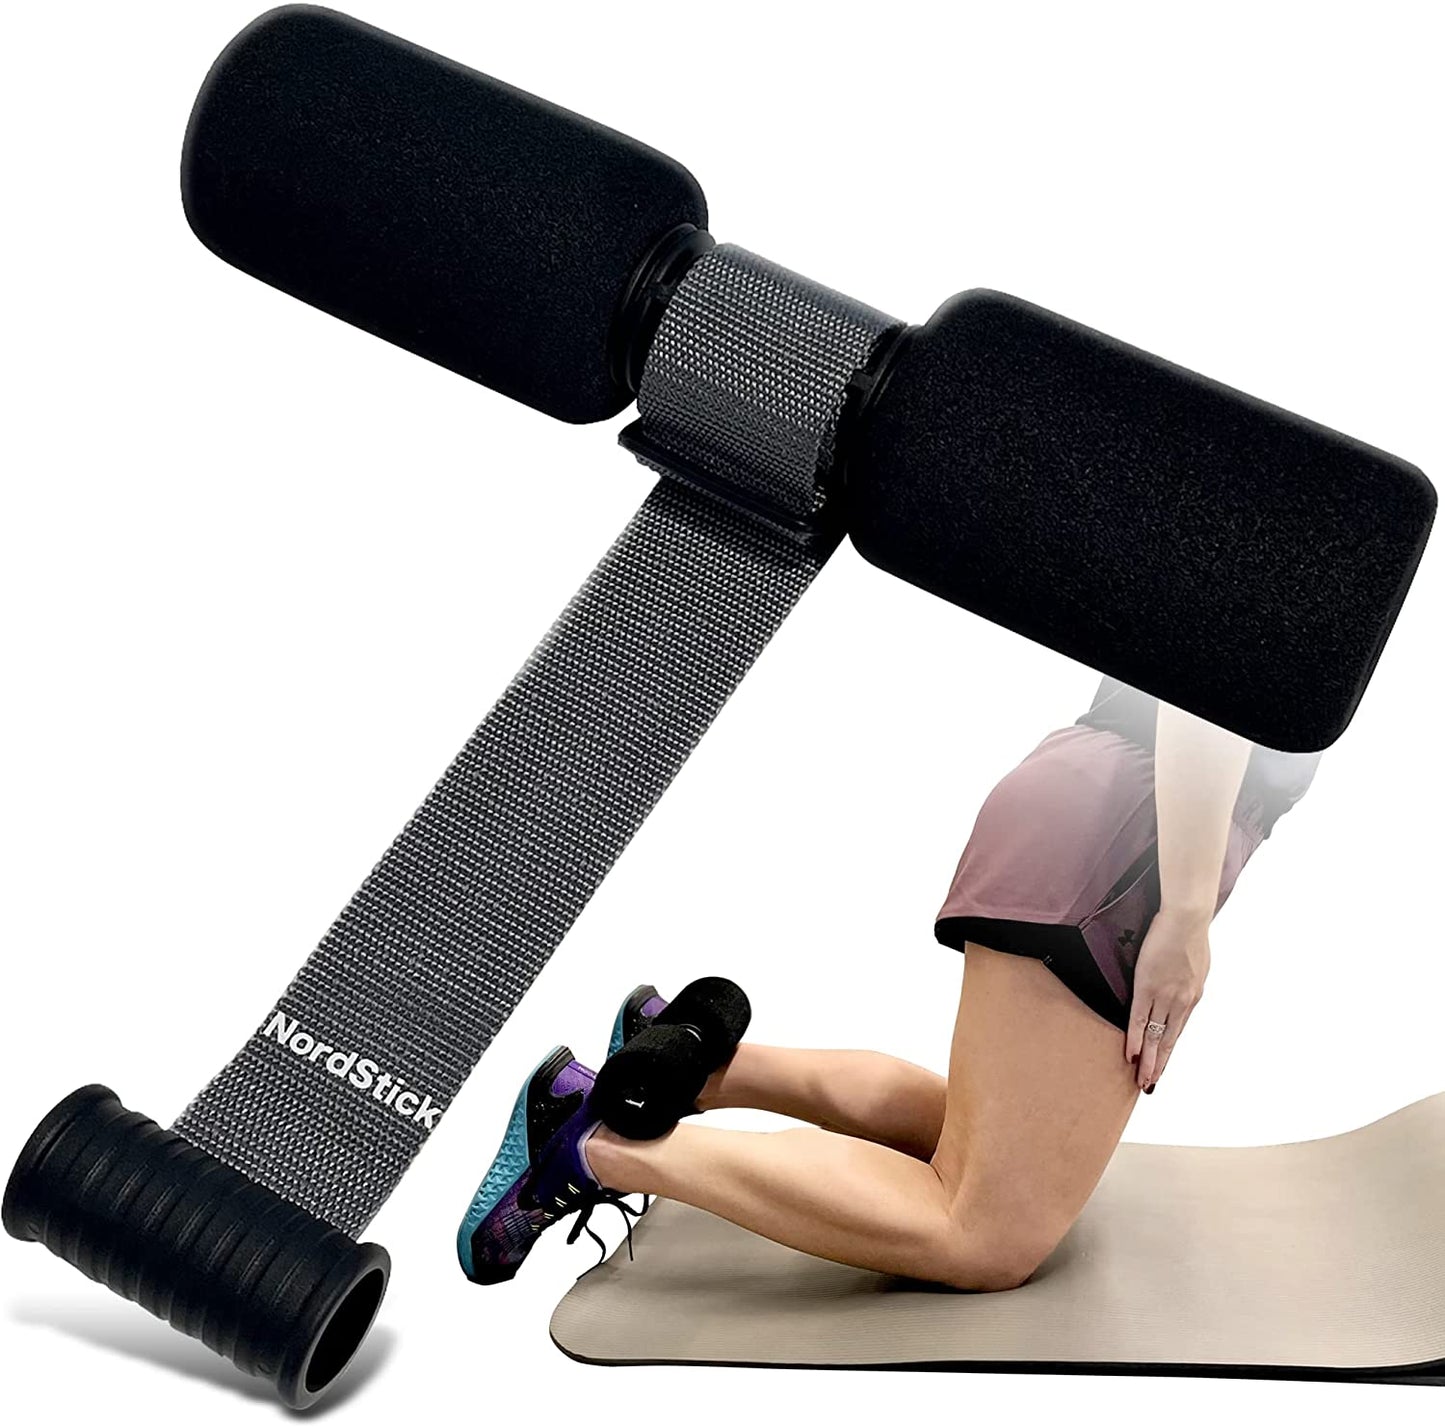 Nordstick Nordic the Original and Pro Hamstring Curl Strap - the Hamstring Curl Exercise System for Home and Travel - 5 Second Setup for Sit Ups, Squats, Ab, and Core Strength Training - up to 500 Lbs